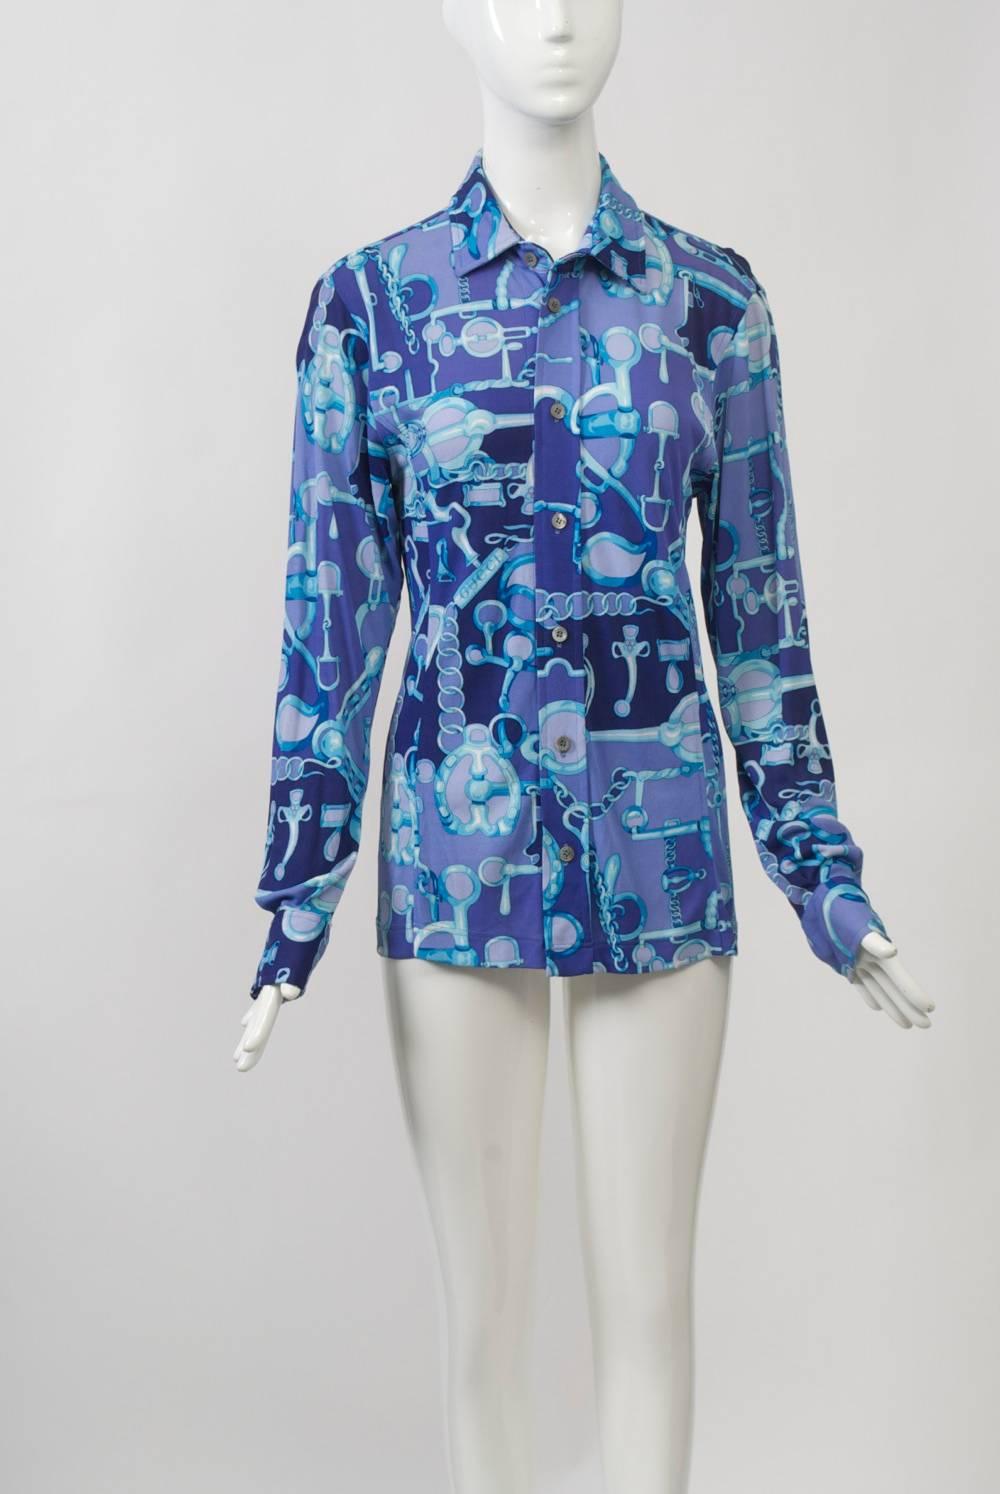 Gucci button-front shirt in varying shades of purple print with a horse-related theme. Fabric is a rayon/nylon blend. Front placket with gray pearl buttons, which also adorn the wrists. Long, shaped bodice.